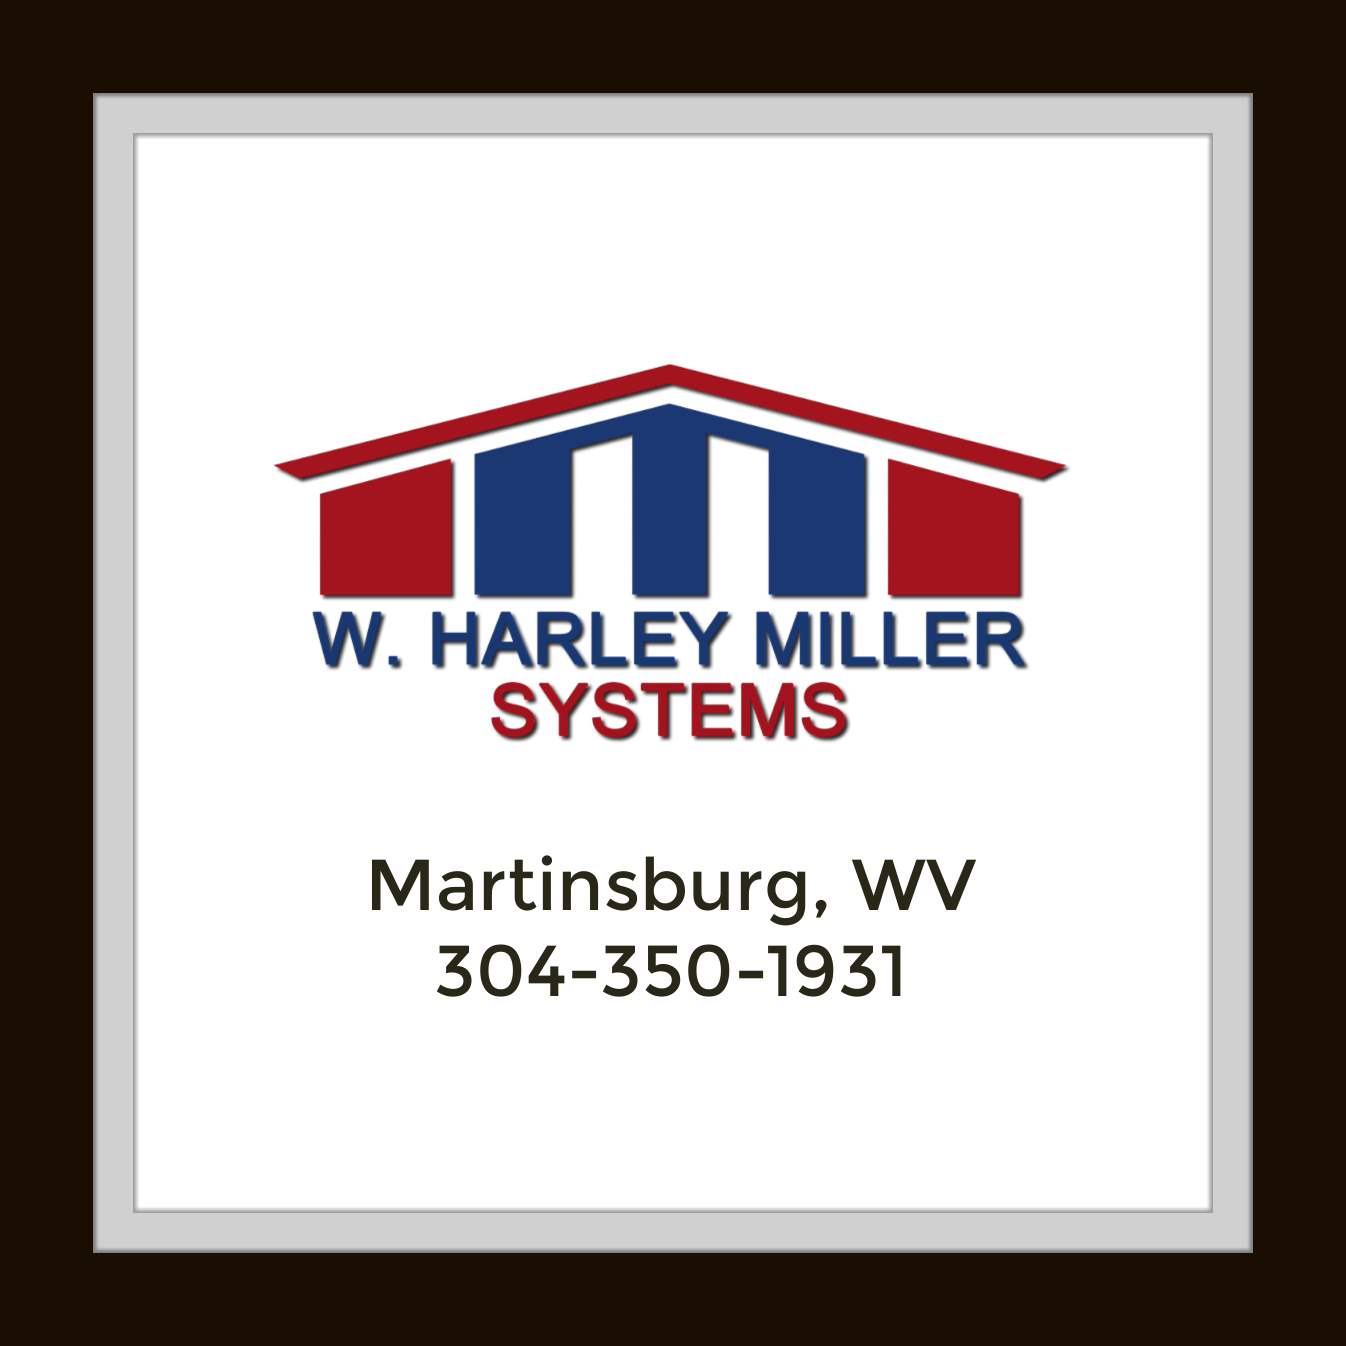 W. Harley Miller Systems